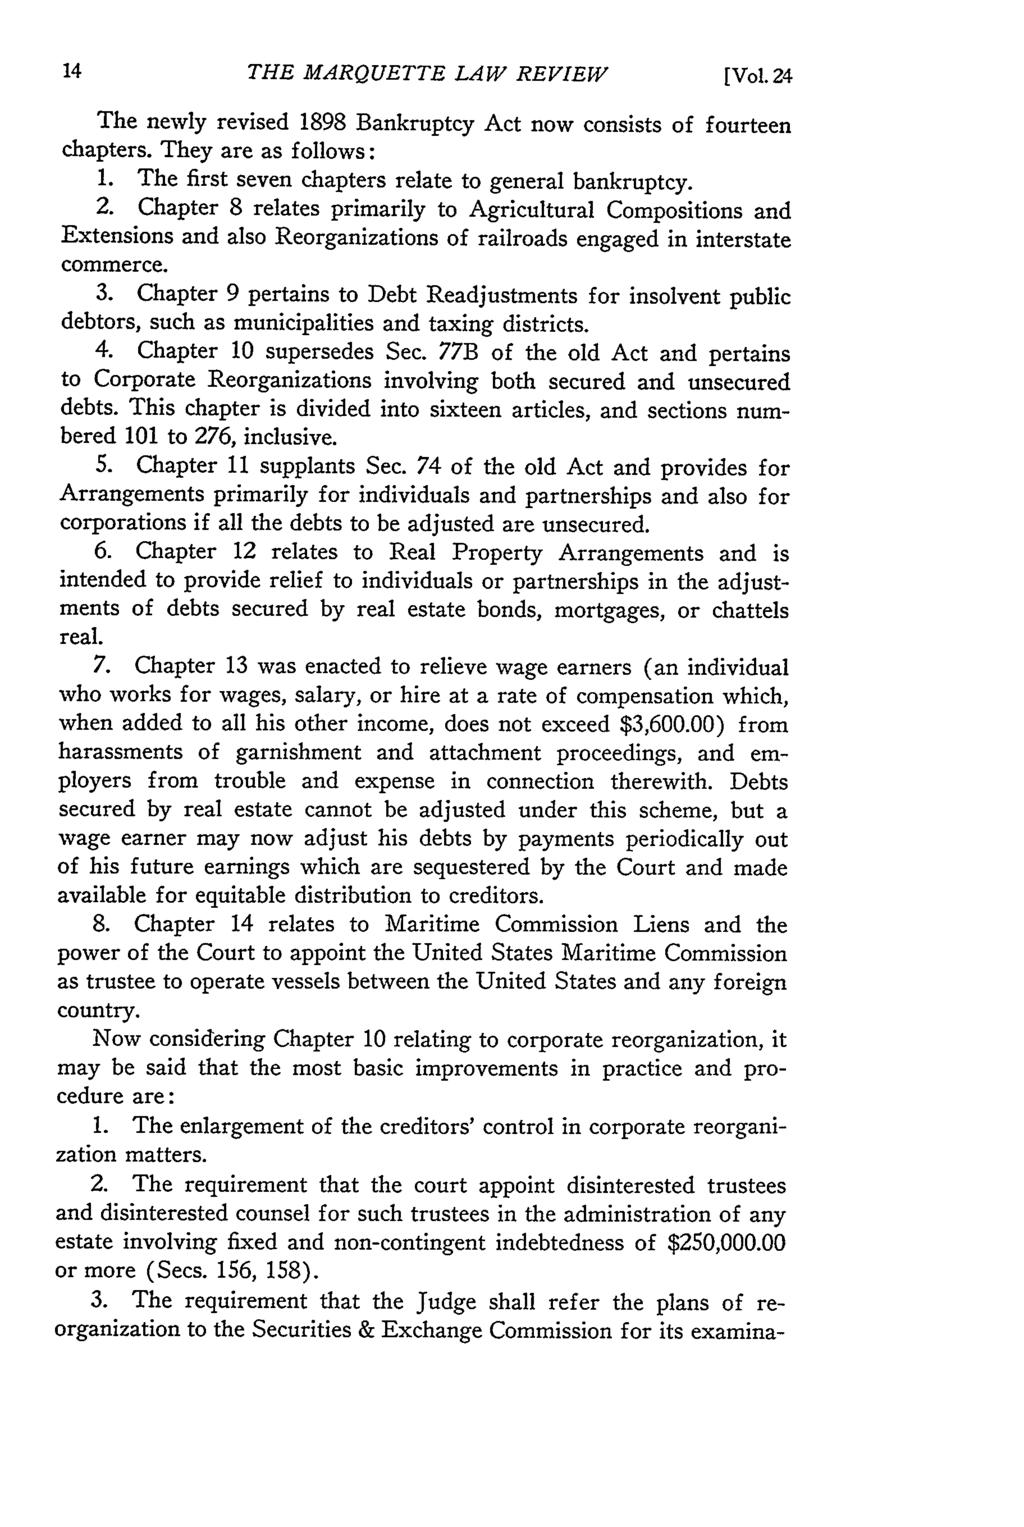 THE MARQUETTE LAW REVIEW [Vol. 24 The newly revised 1898 Bankruptcy Act now consists of fourteen chapters. They are as follows: 1. The first seven chapters relate to general bankruptcy. 2. Chapter 8 relates primarily to Agricultural Compositions and Extensions and also Reorganizations of railroads engaged in interstate commerce.